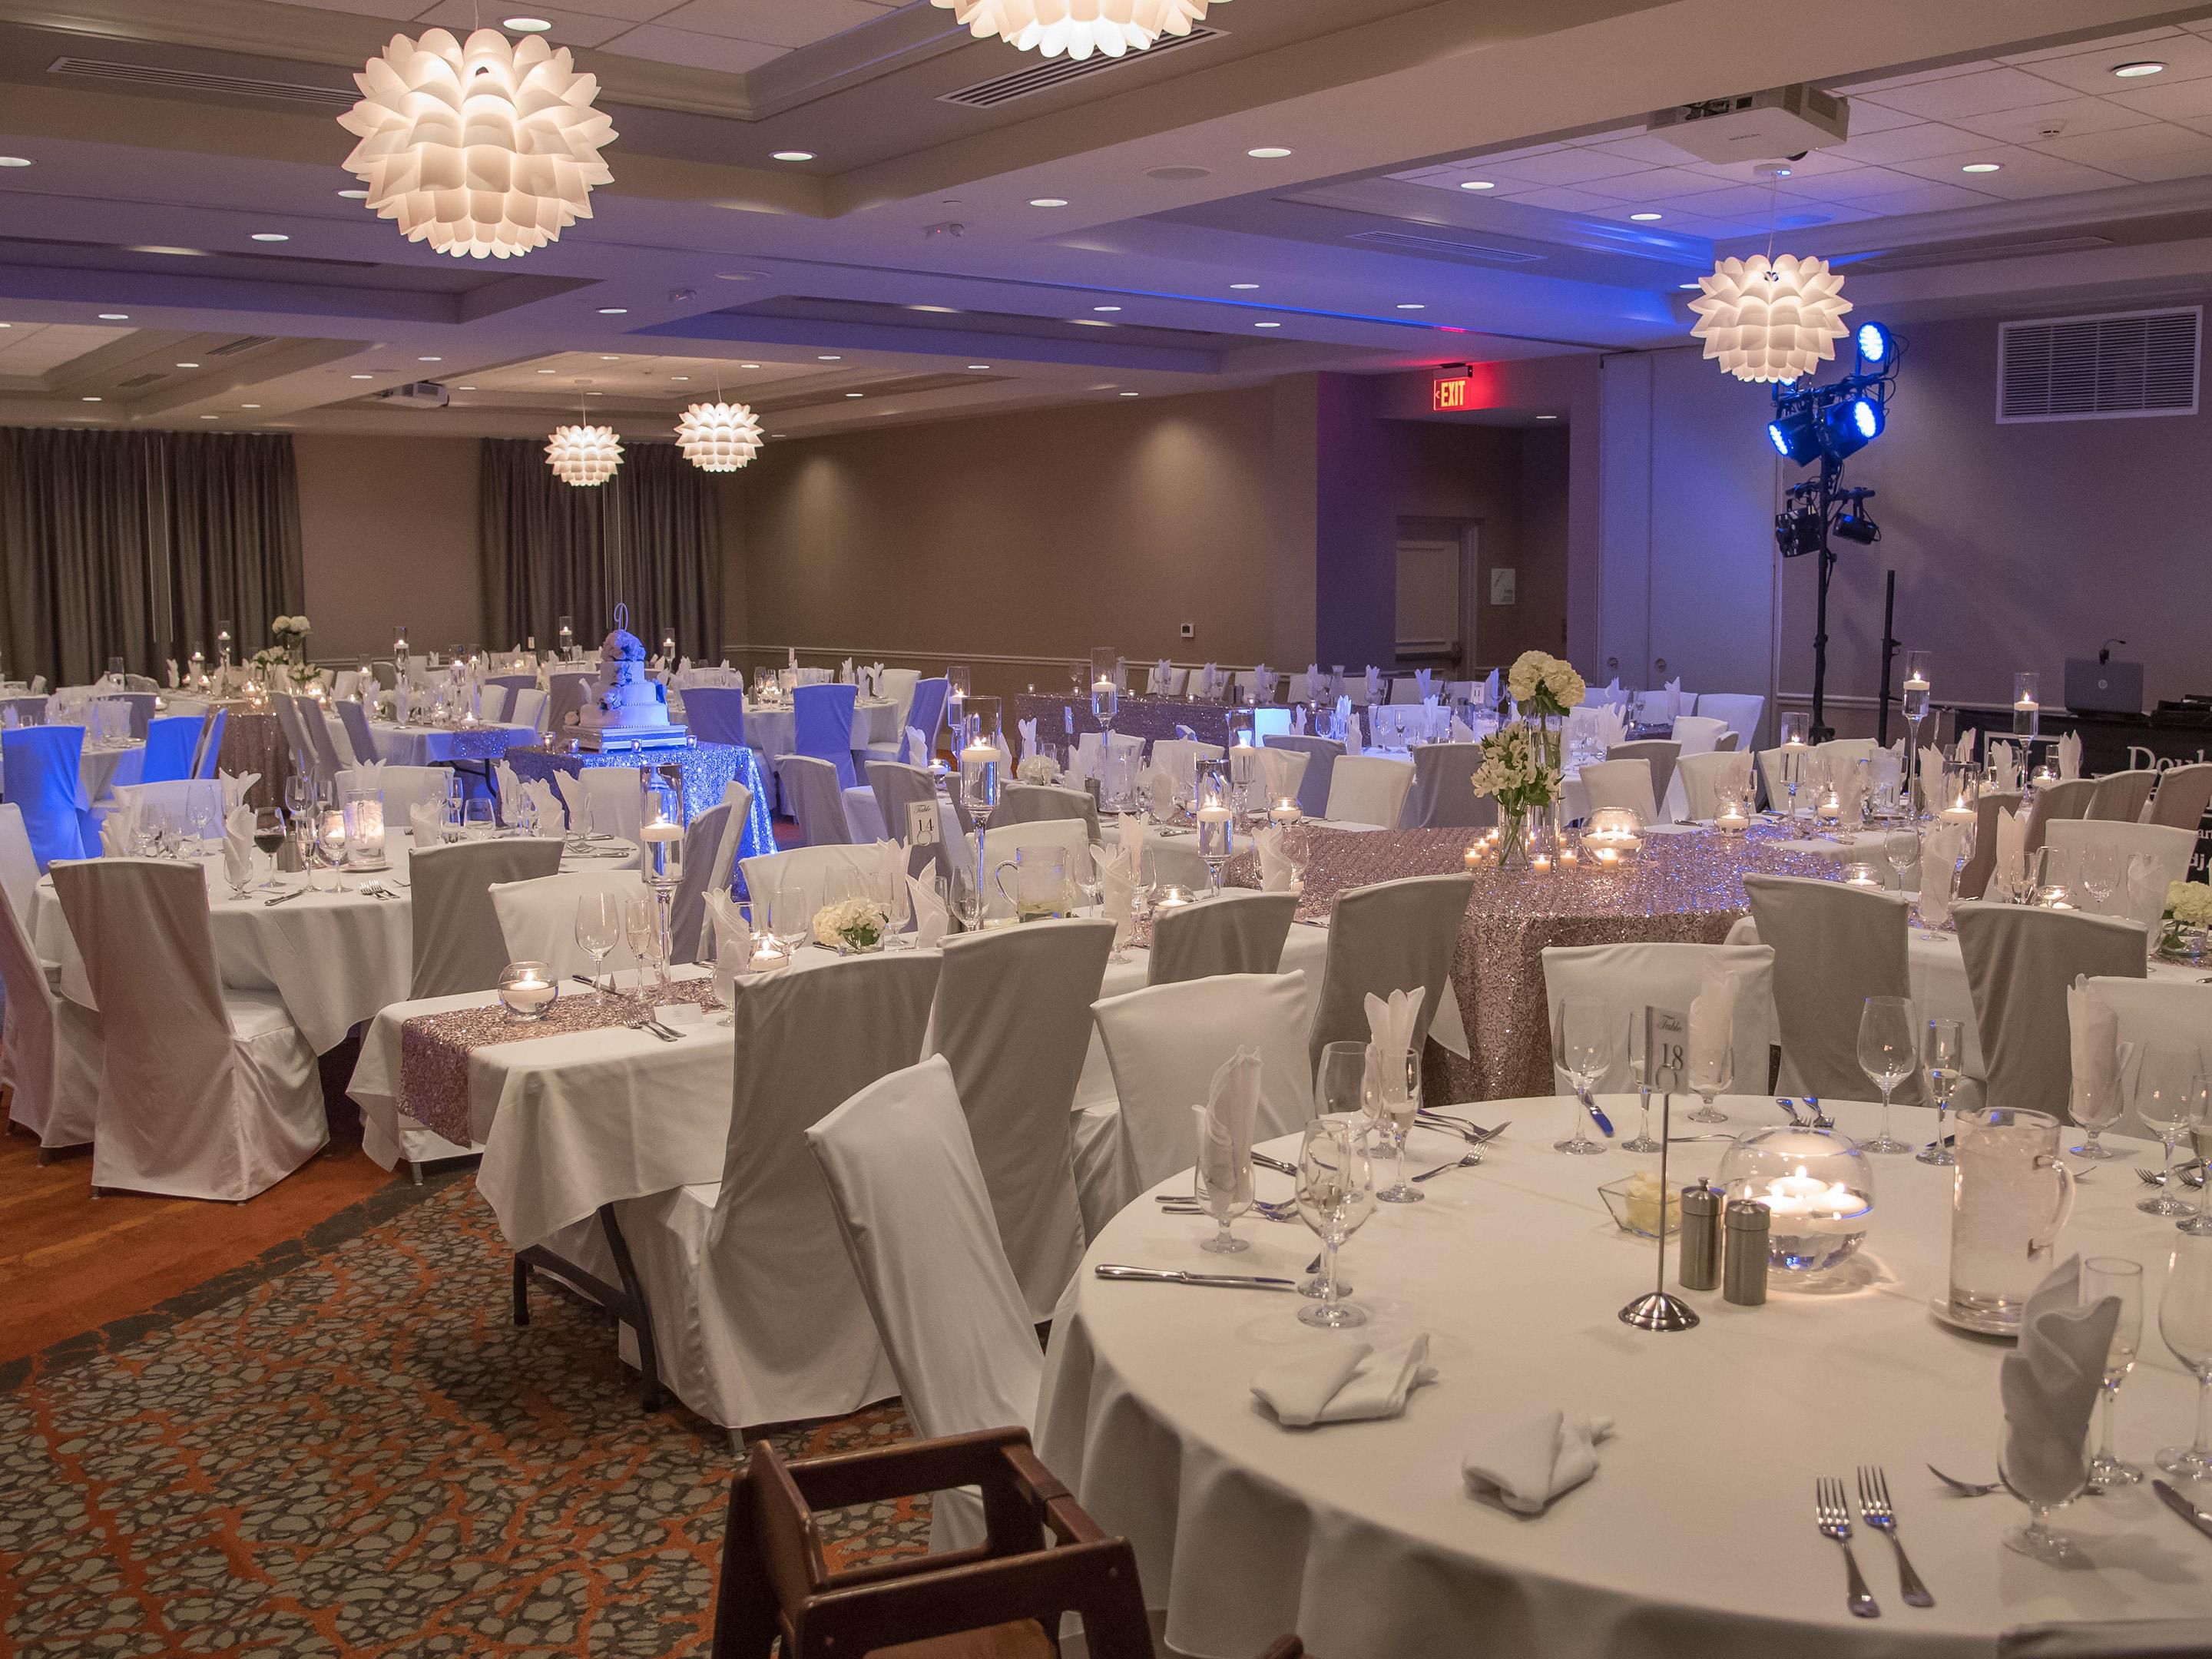 The event specialists at the JBar Holiday Inn and Suites are here to help you get down to business. We have space for meetings and corporate events of all shapes and sizes, a team of chefs available to customize a menu to fit your needs, and luxurious hotel rooms to accommodate your out of town guests.